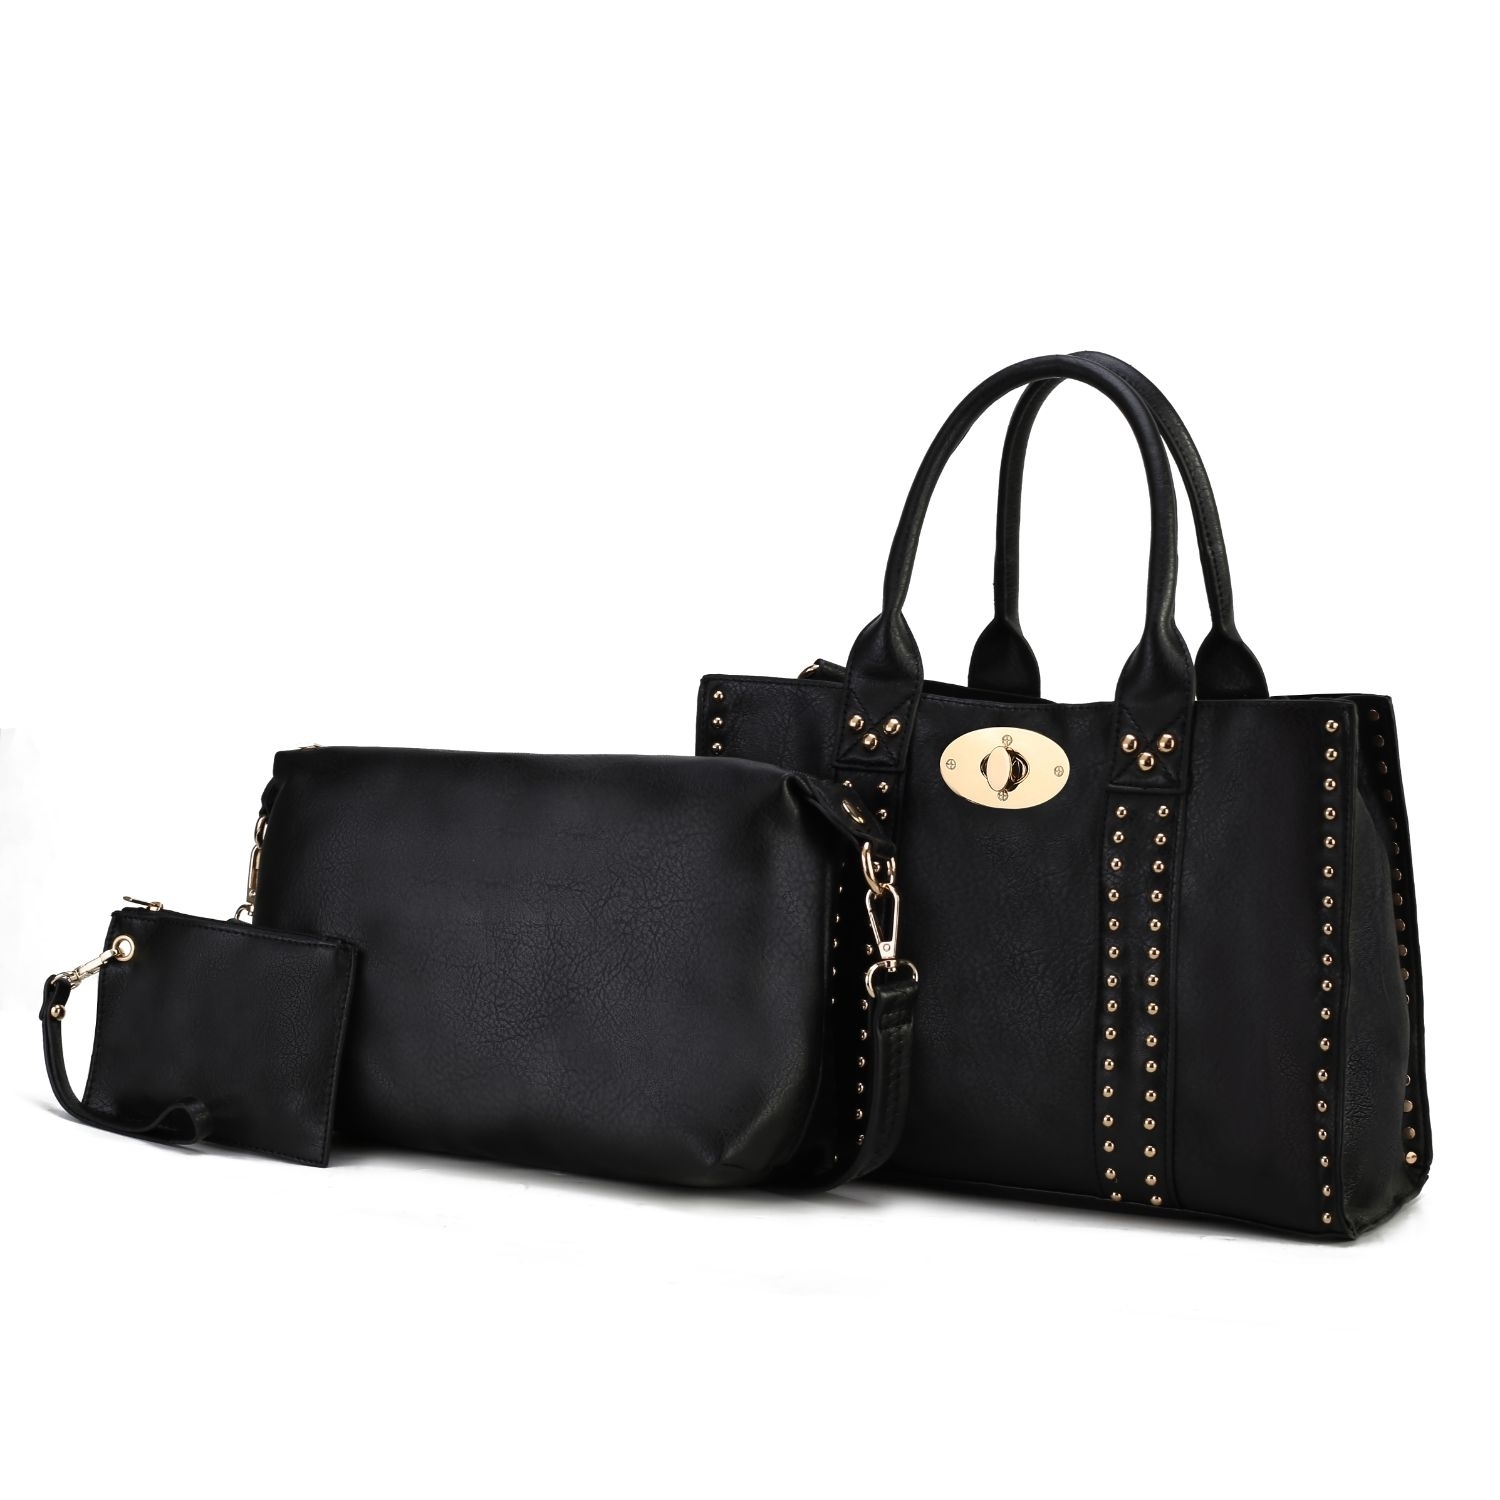 MKF Collection Elissa 3 Pc Set Satchel Handbag With Pouch & Coin Purse By Mia K. - Black